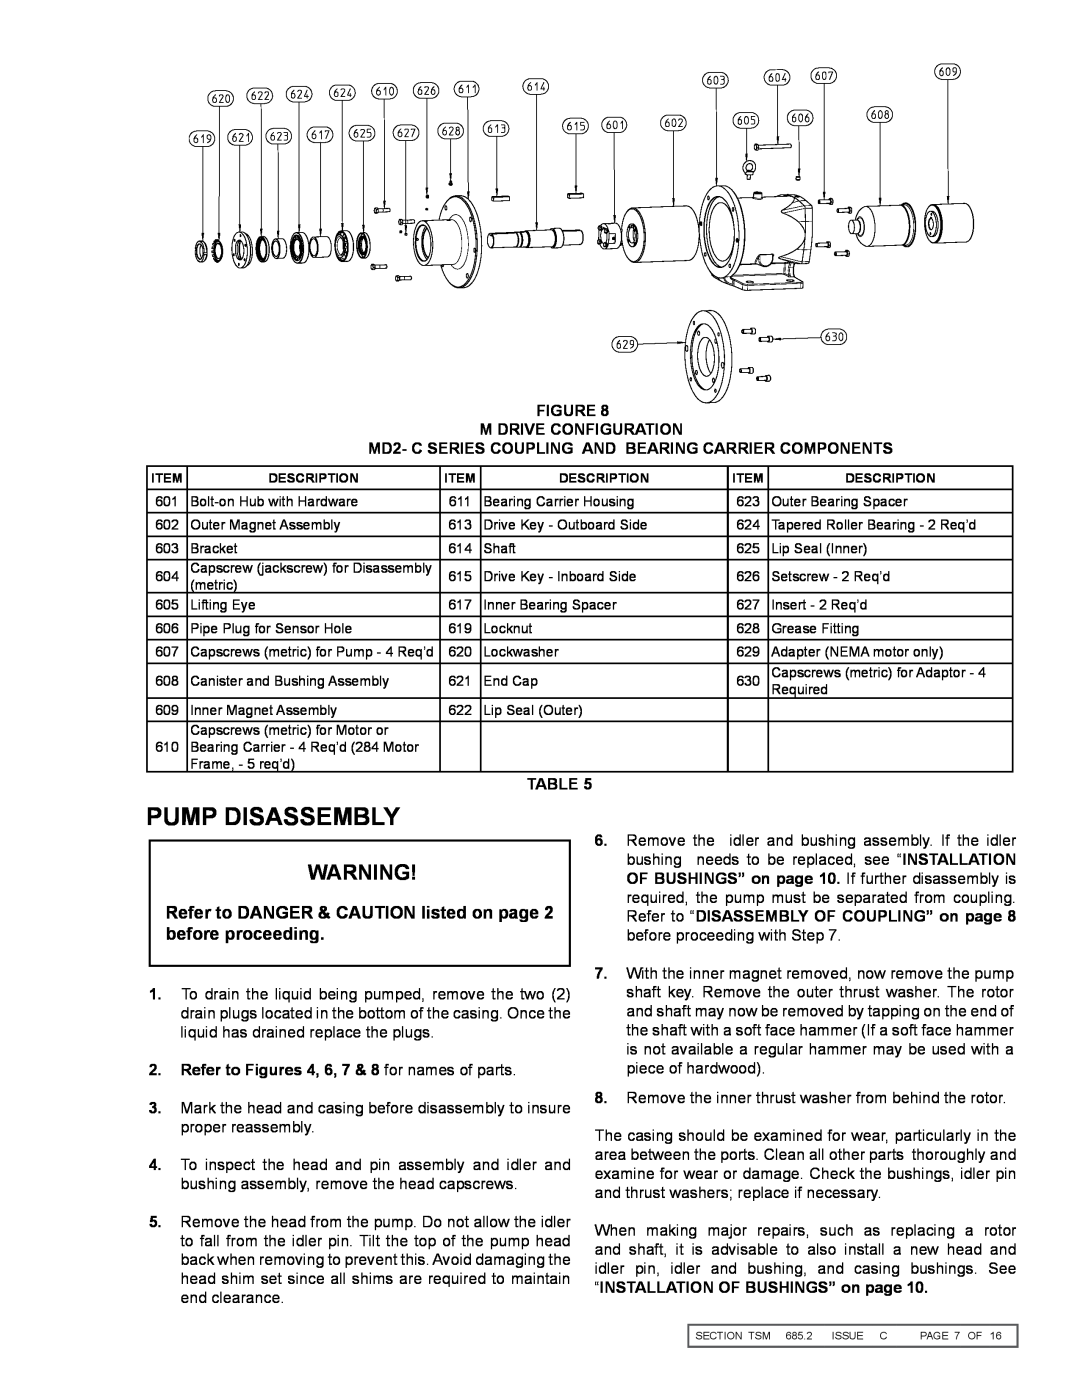 Viking 855 service manual Pump Disassembly, Figure M Drive Configuration, Refer to Figures 4, 6, 7 & 8 for names of parts 